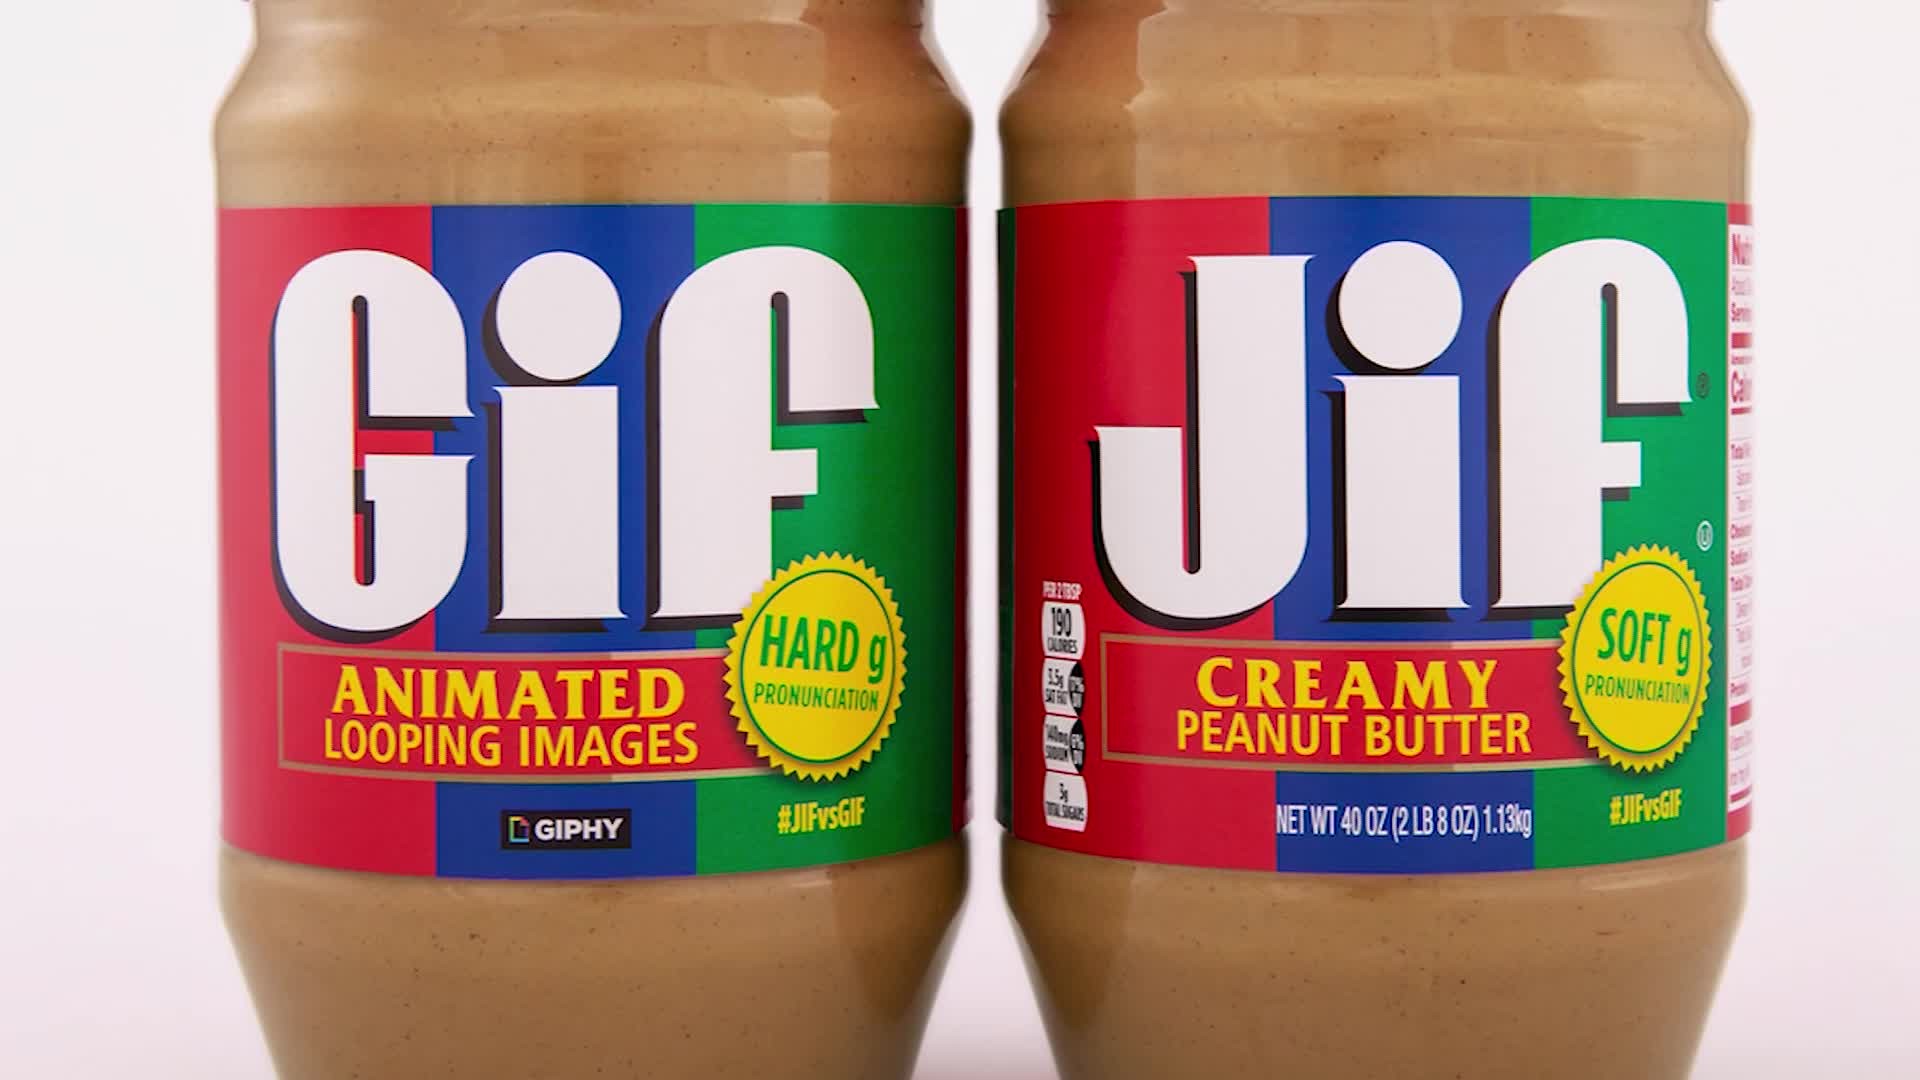 It's a GIF for Jif. The popular peanut butter brand is releasing a jar featuring the name spelled with a "g" instead of a "j." It's a partnership with GIPHY, the popular GIF search engine.
The jar even defines GIF, animated, looping images. It also asserts that the word should be pronounced with a hard "g," not a soft one; however, Steve Wilhite, the creator of the gif, has said it should be a soft "g."
Despite Wilhite's clarification, the debate still rages over how to pronounce the word. GIF stands for graphics interchange format. The limited edition jars are on sale for ten dollars on Amazon.